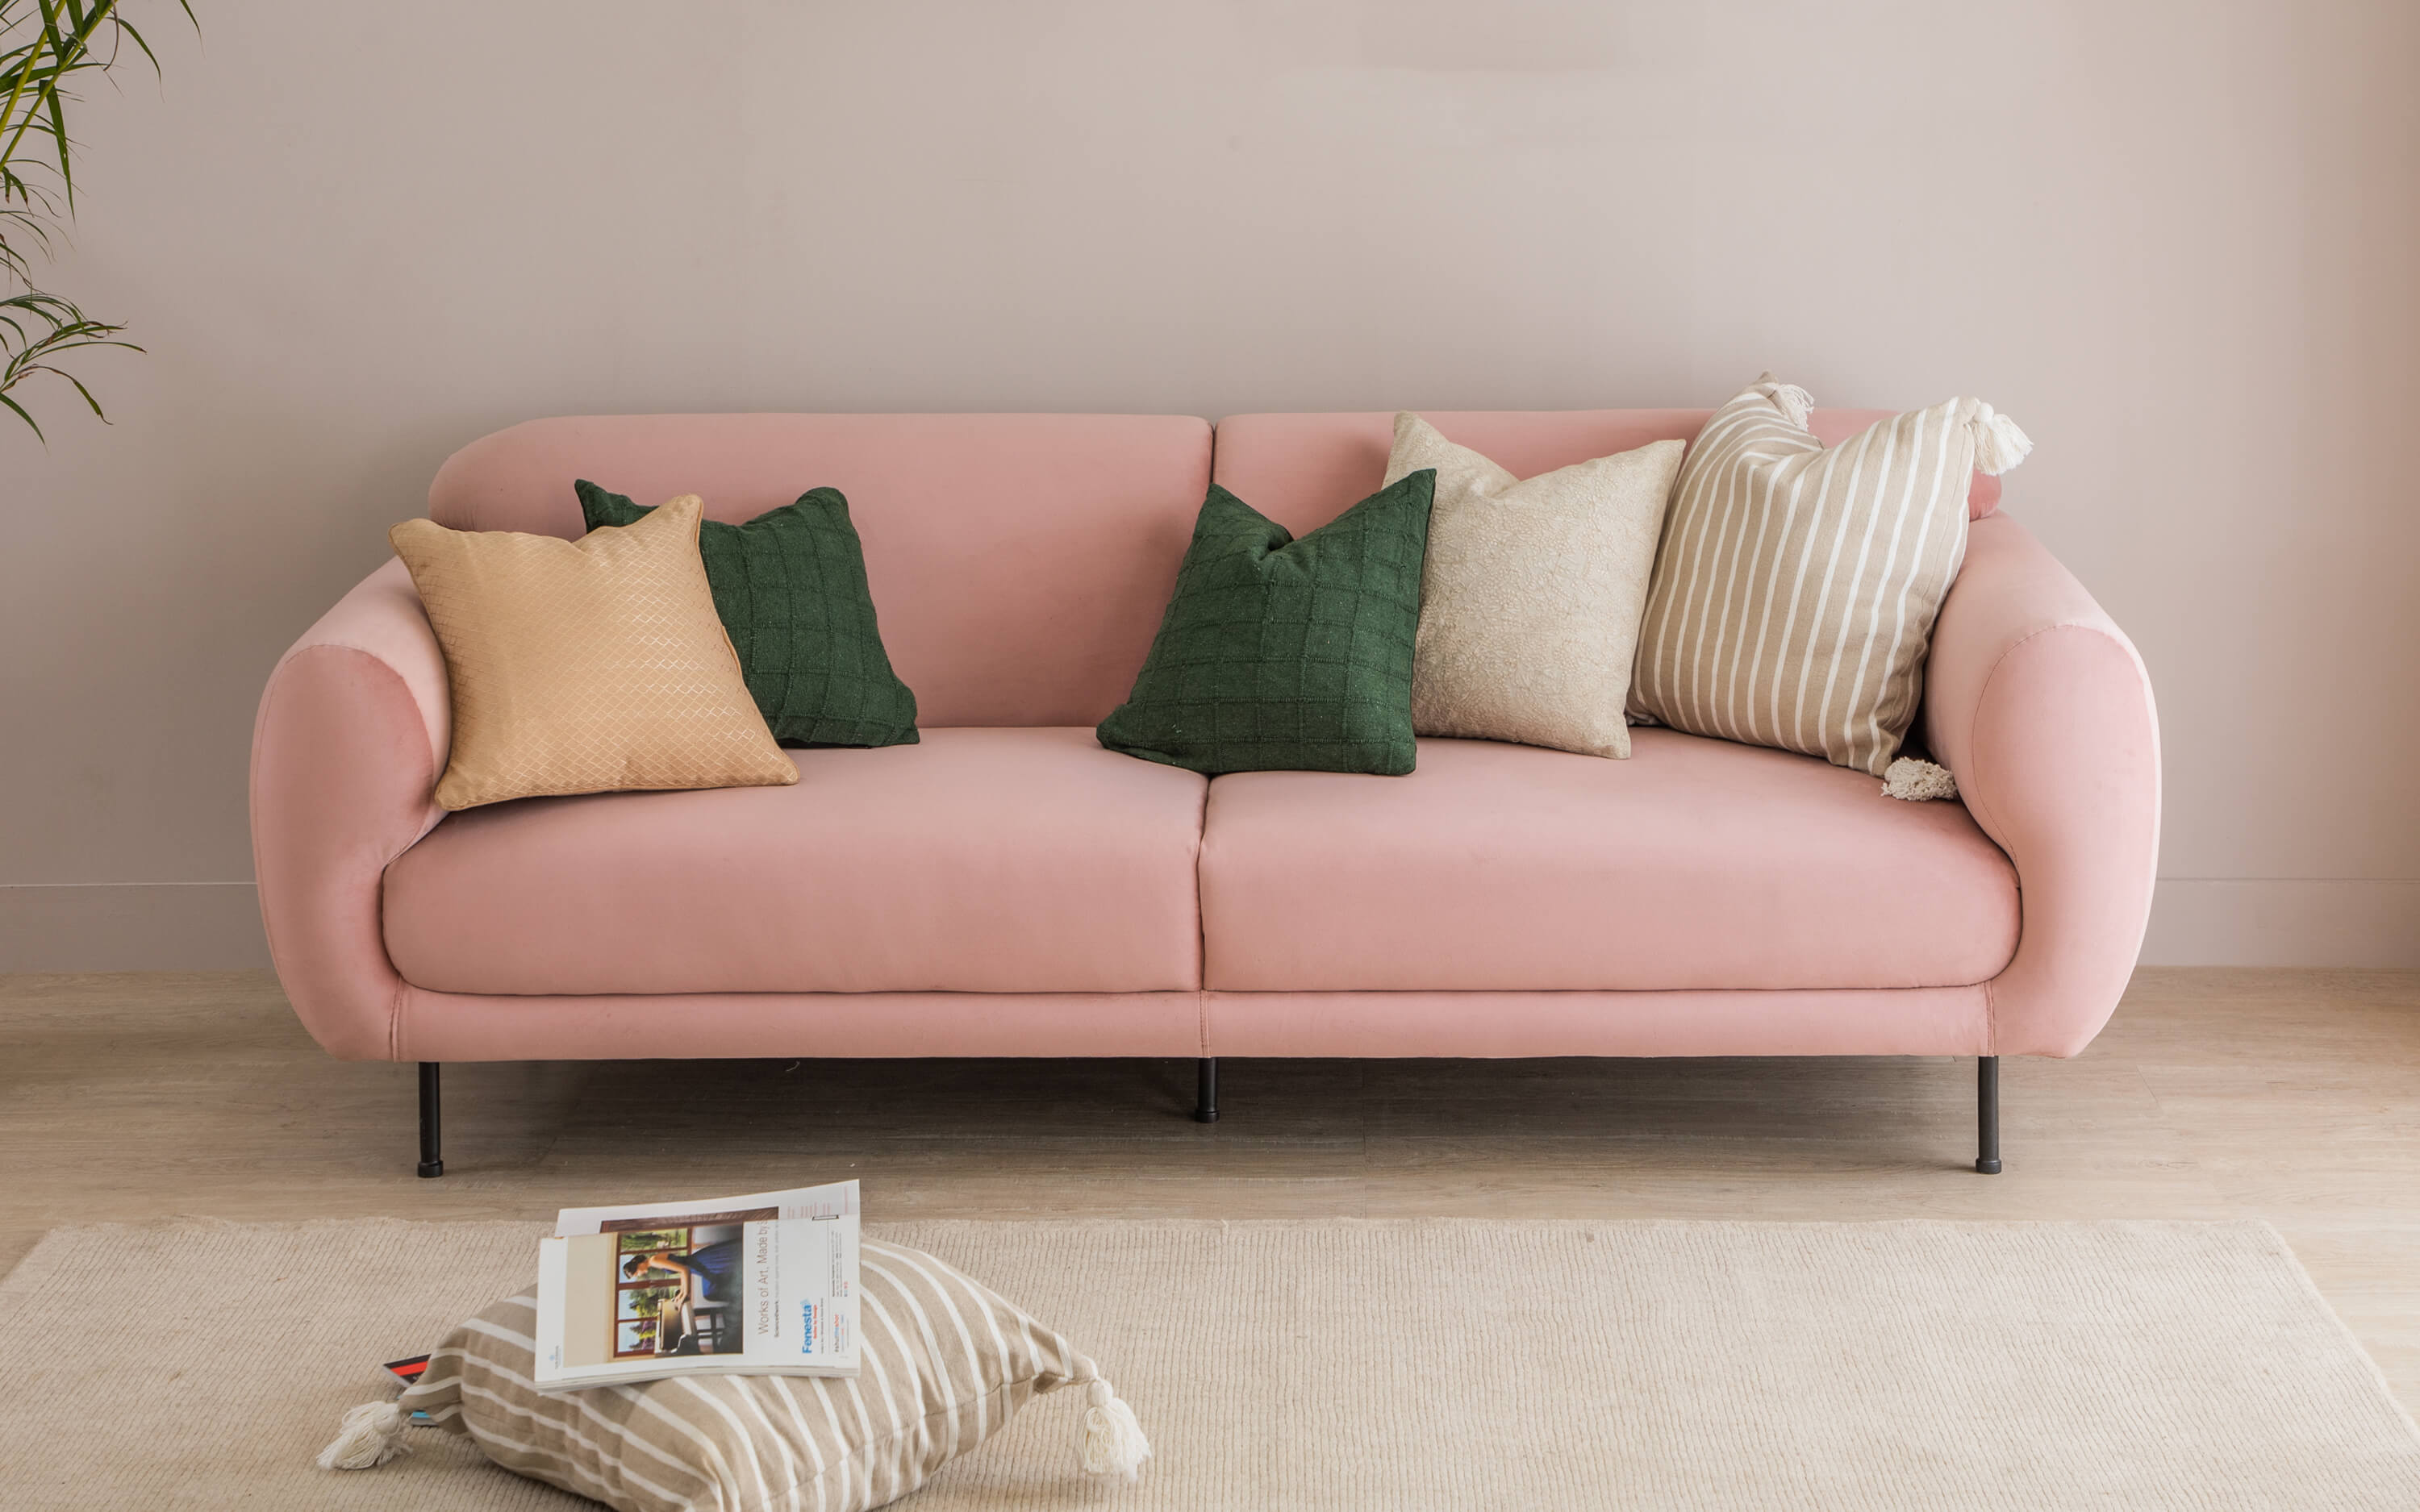  3 Seater Sofa in plush pink colour upholstered fabric with rolled-up arm rests  - Orange Tree